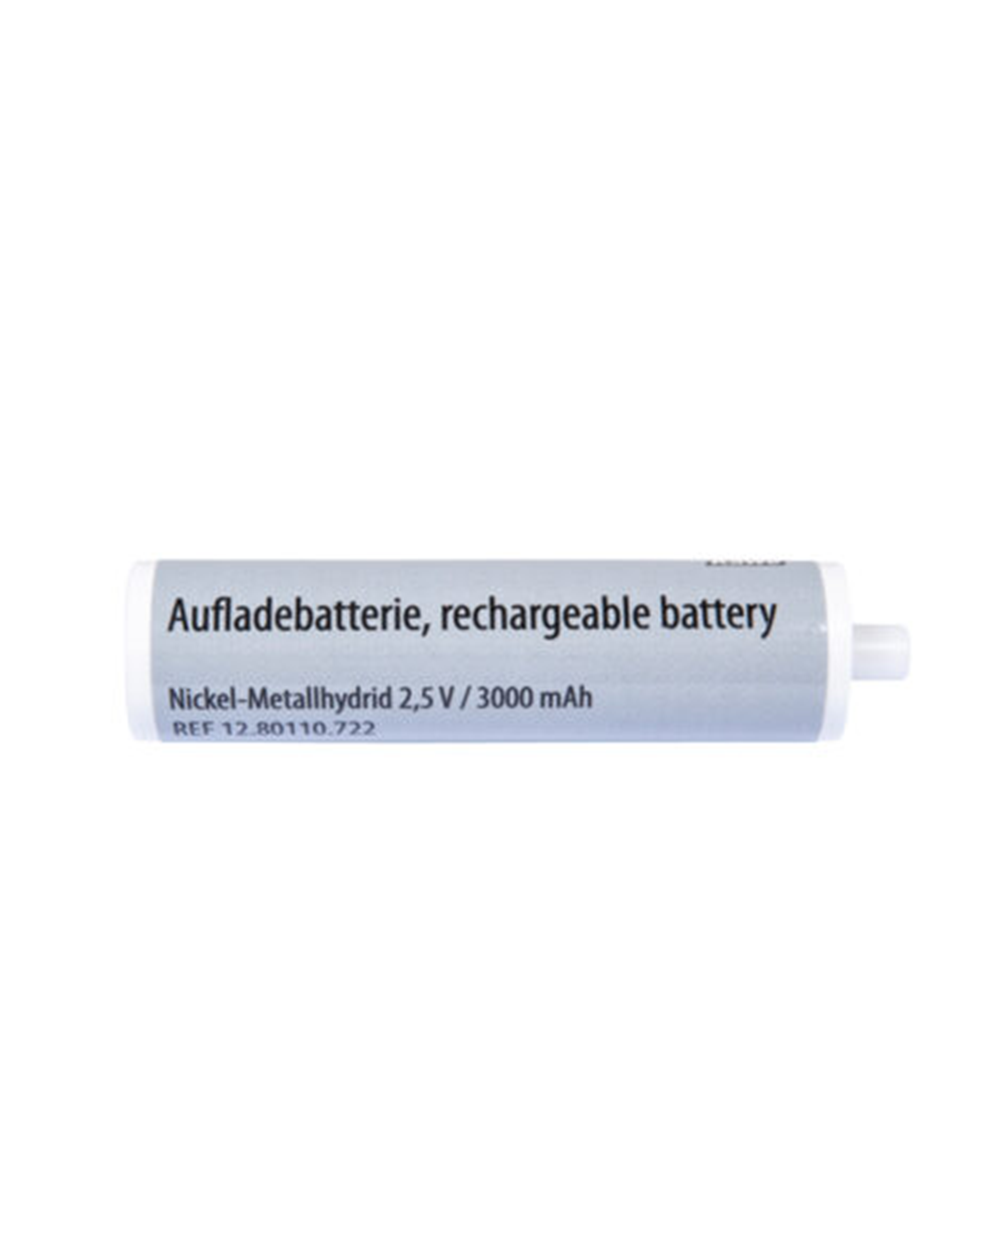 KaWe Rechargeable Battery 2.5 V